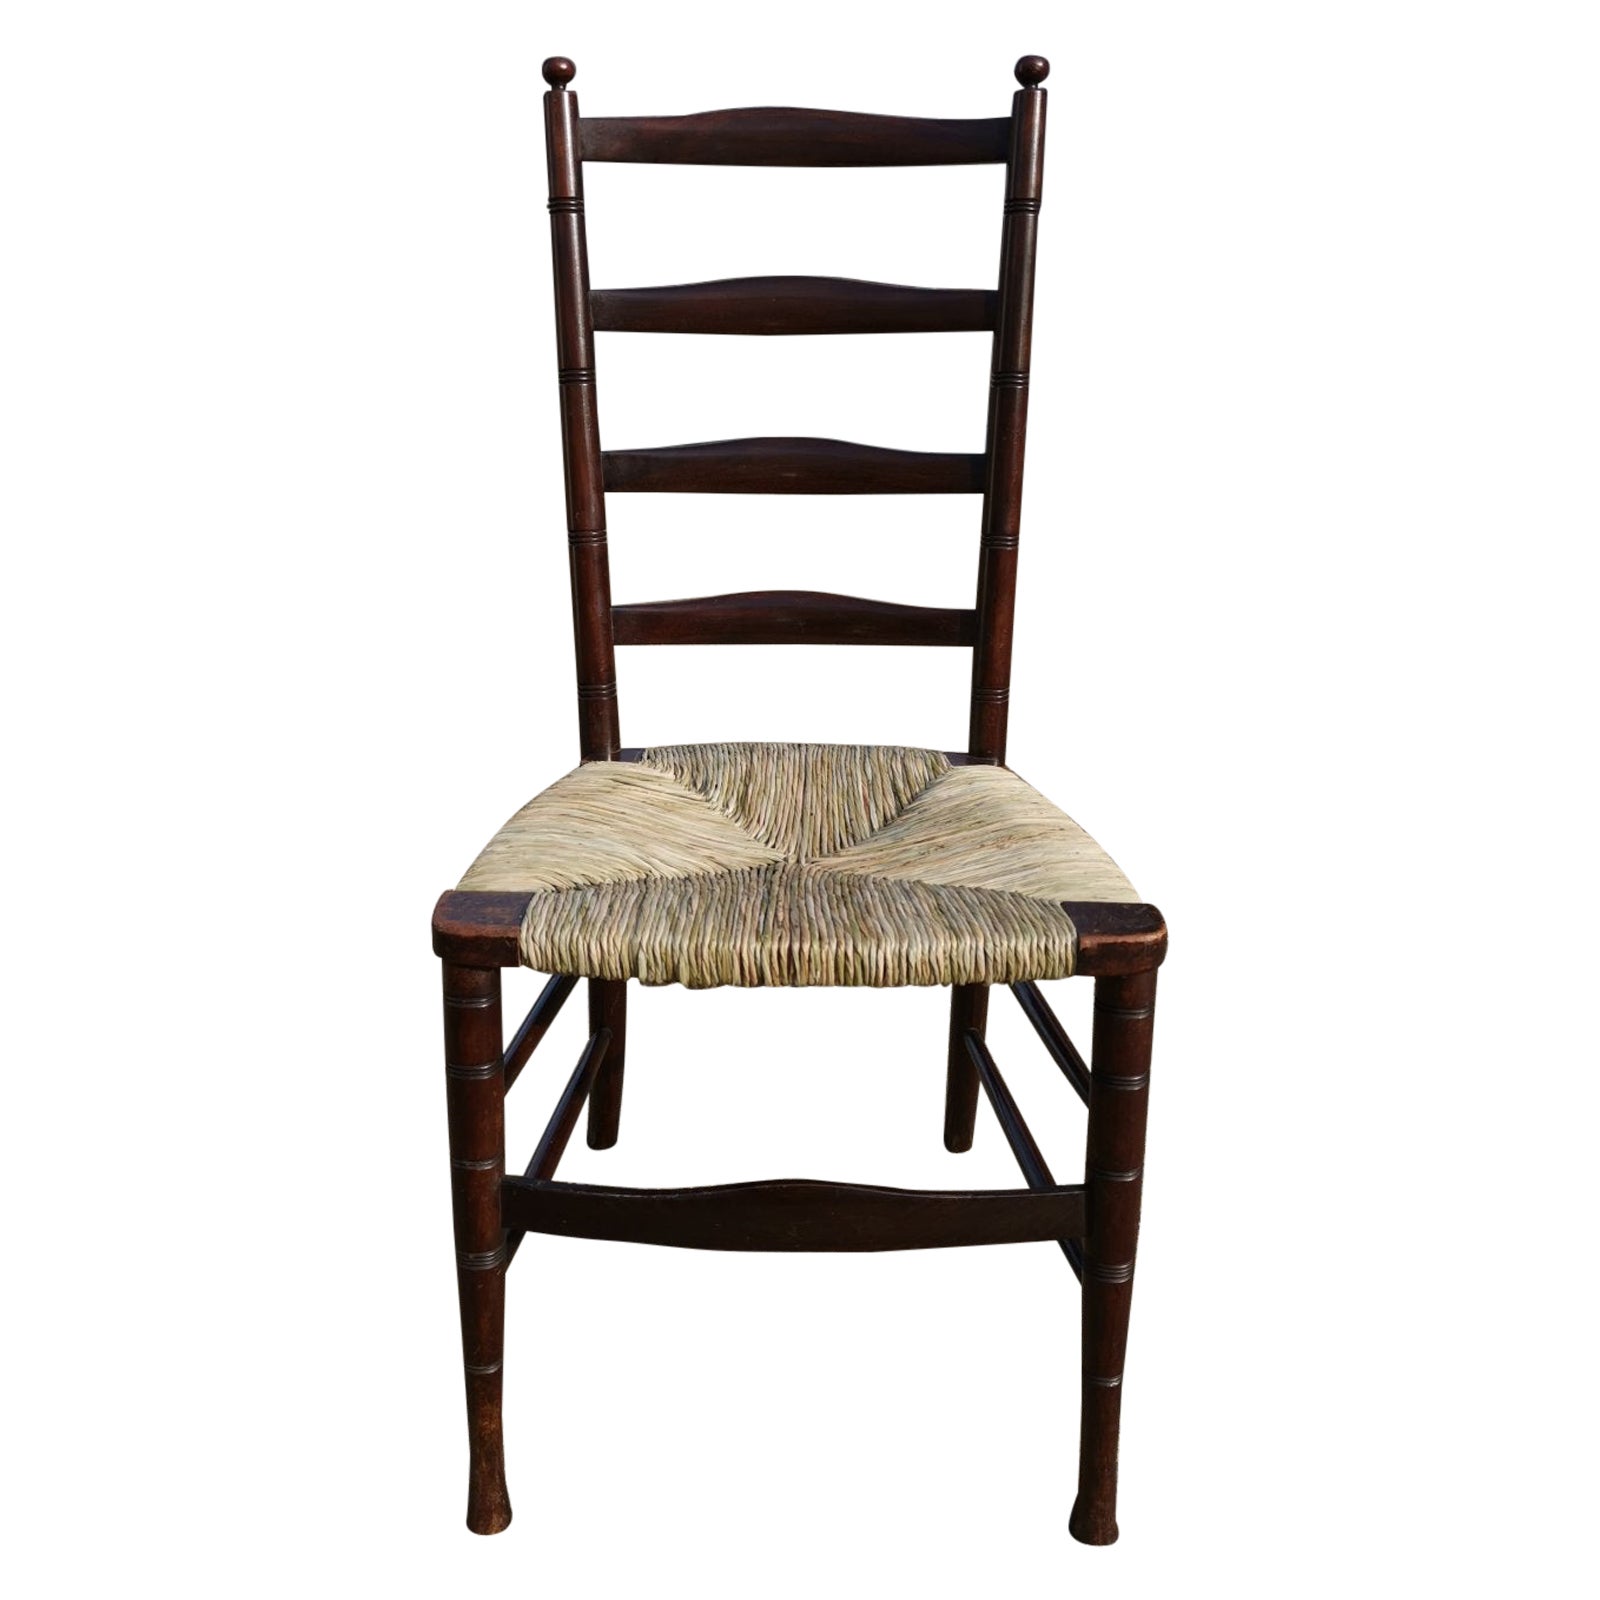 Liberty and Co. London. 
An elegant English Aesthetic Movement walnut ladder back side chair. 
The last three images are from: A Pictorial Dictionary of British 19th Century Furniture Design. They show slight variations in this design.
With